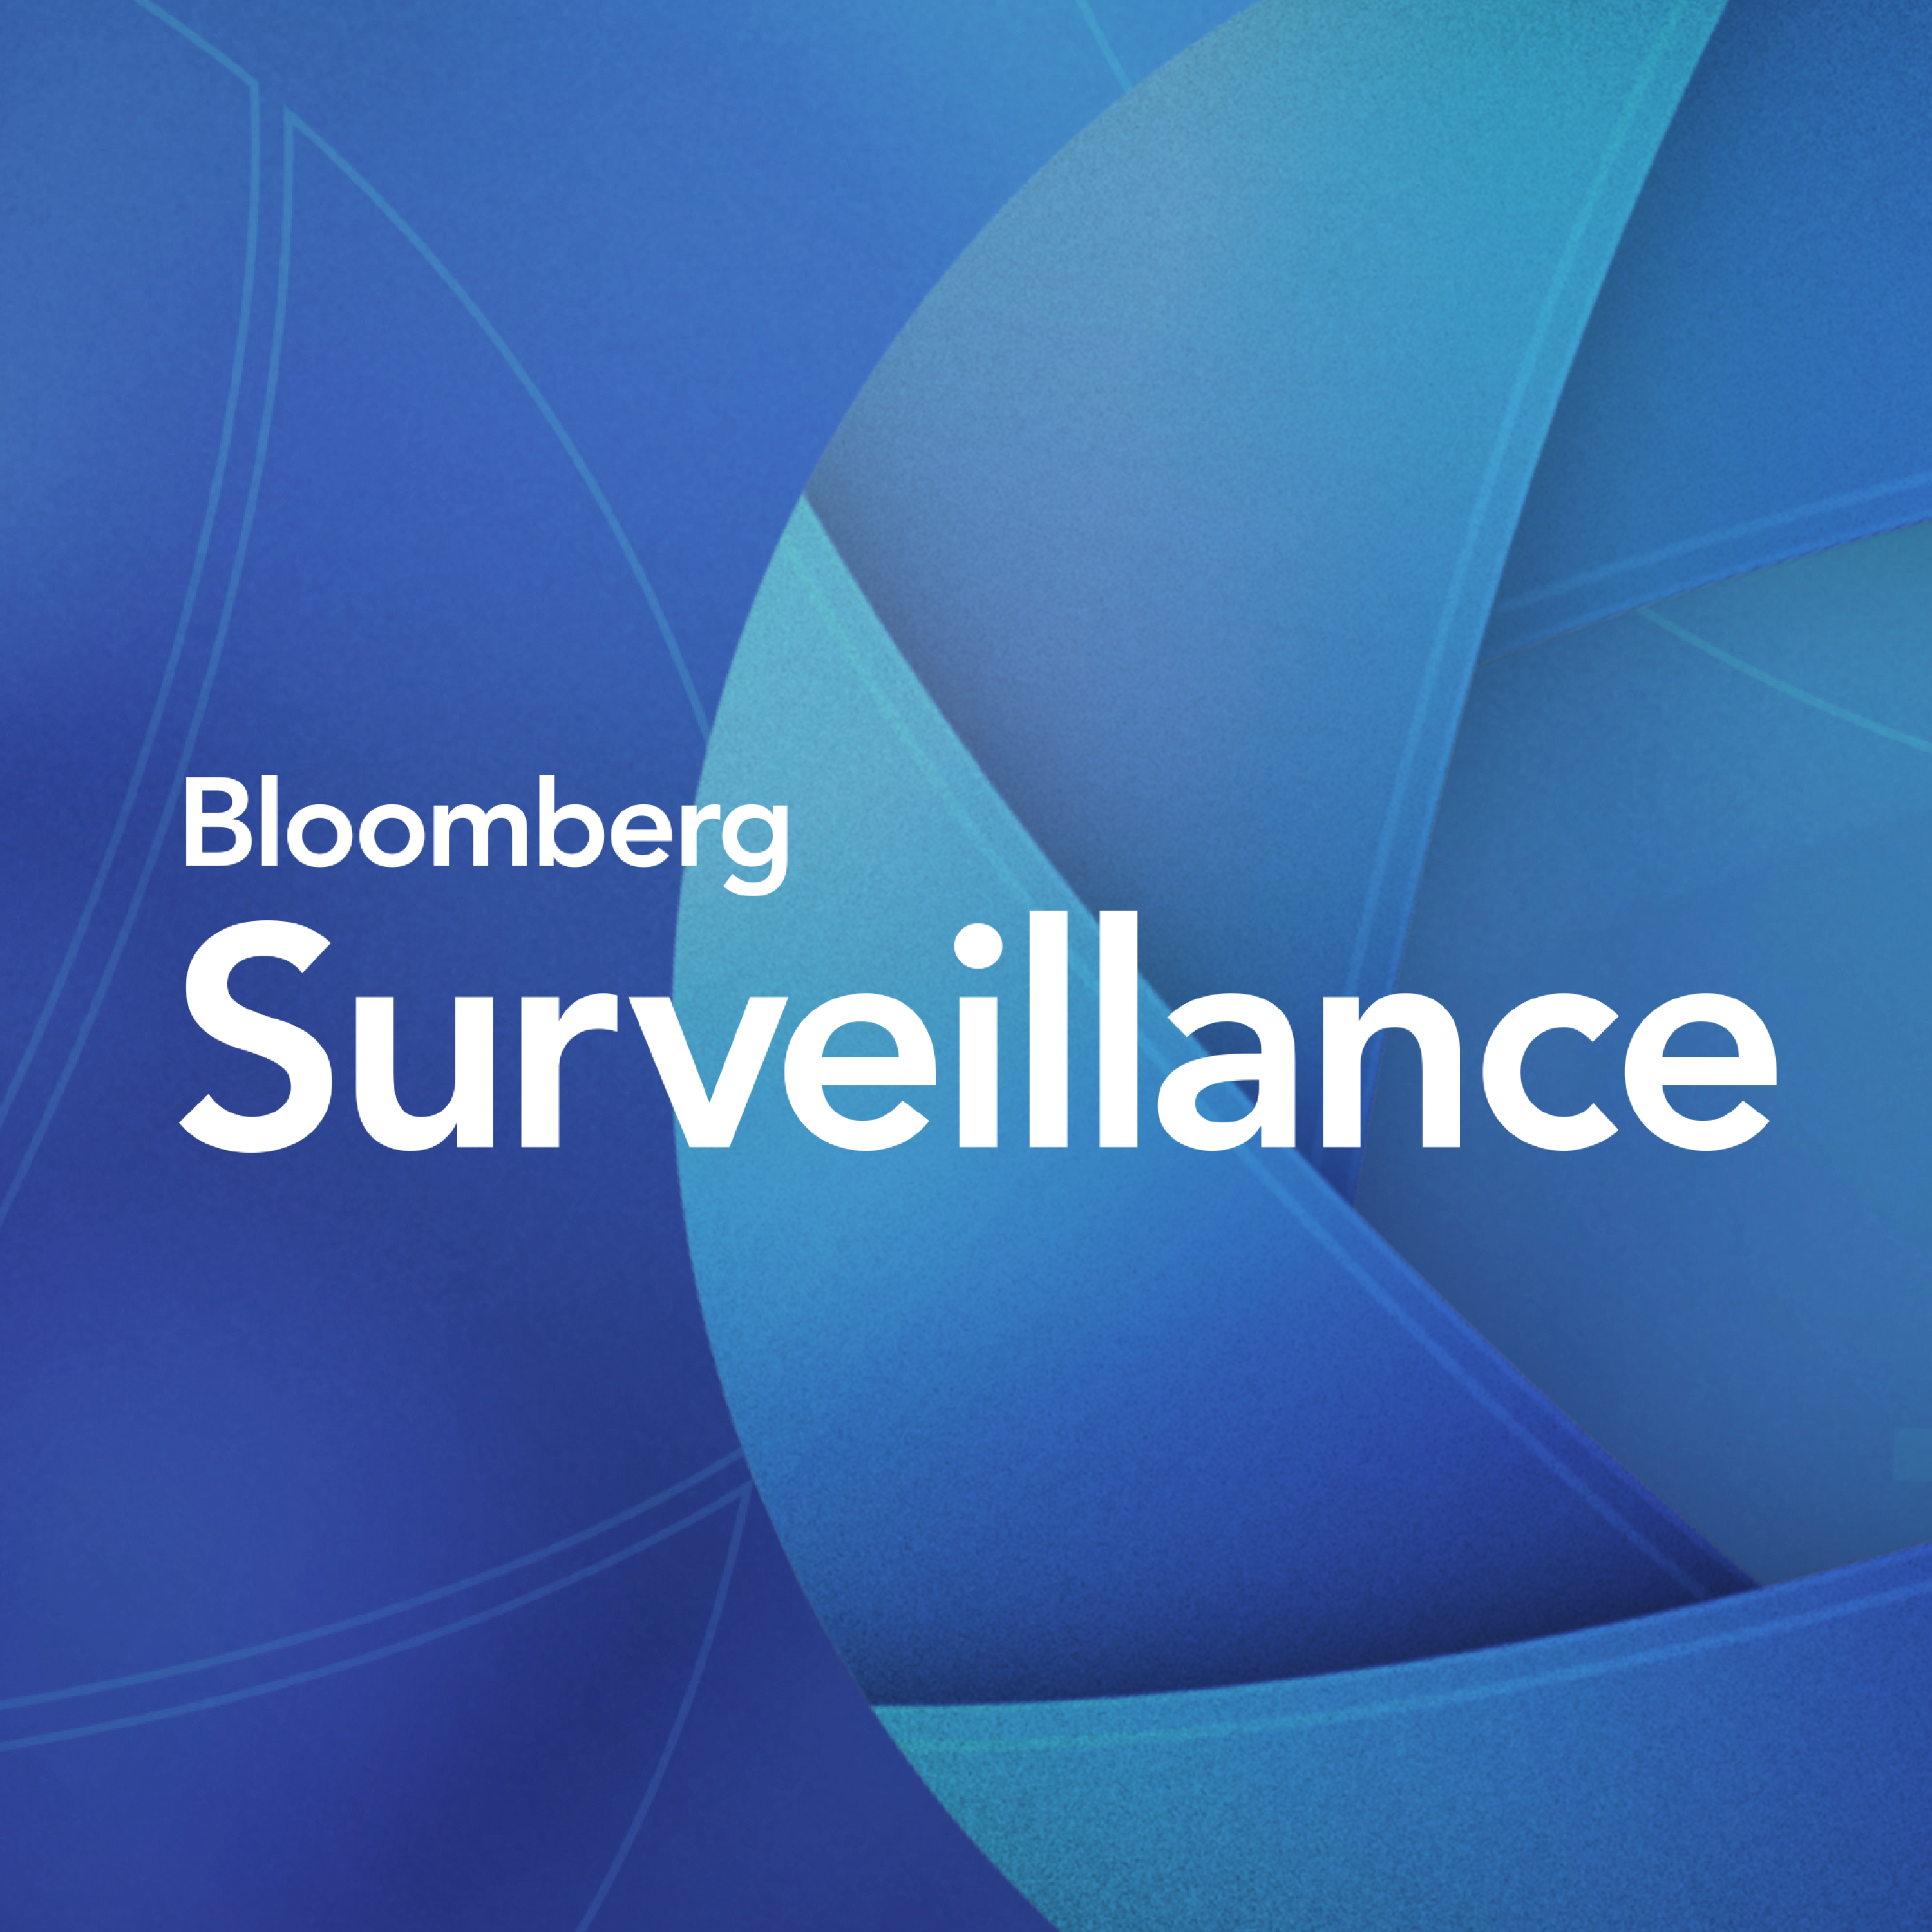 Surveillance: Fed Game Plan with Dudley